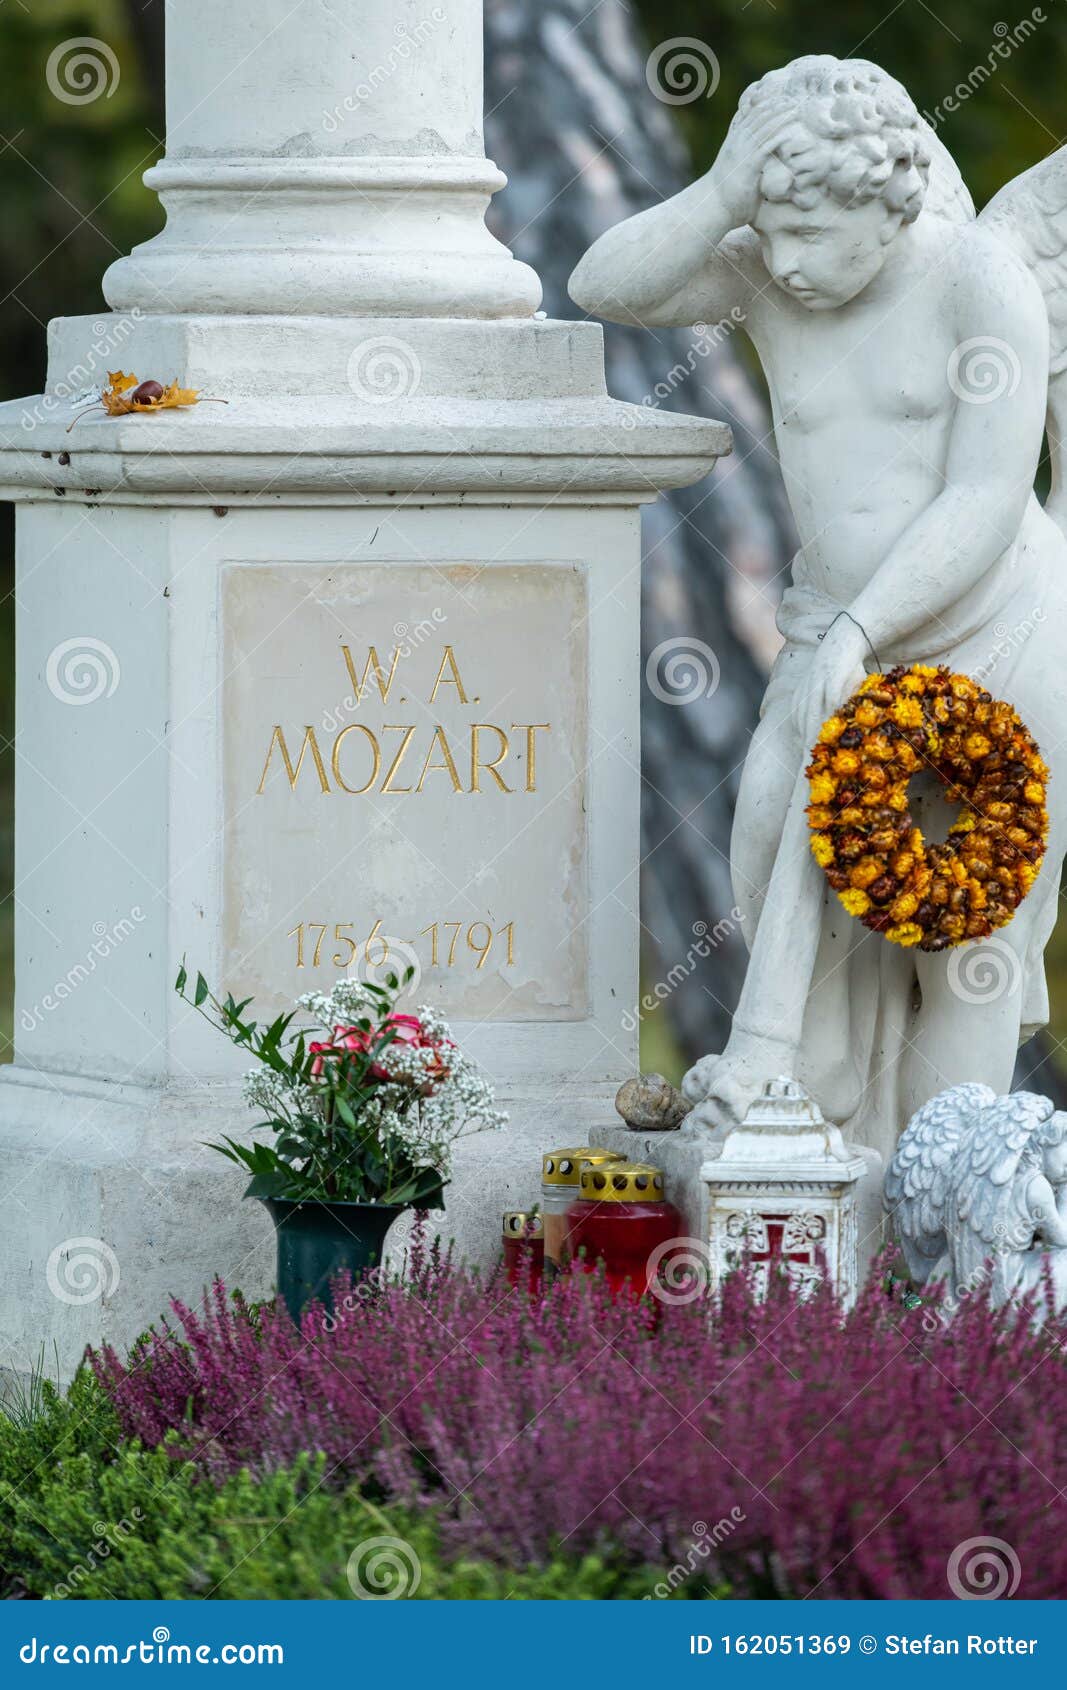 The Gravestone of Wolfgang Mozart in St. Marx Cemetery Stock Image - Image of cemetery, 162051369